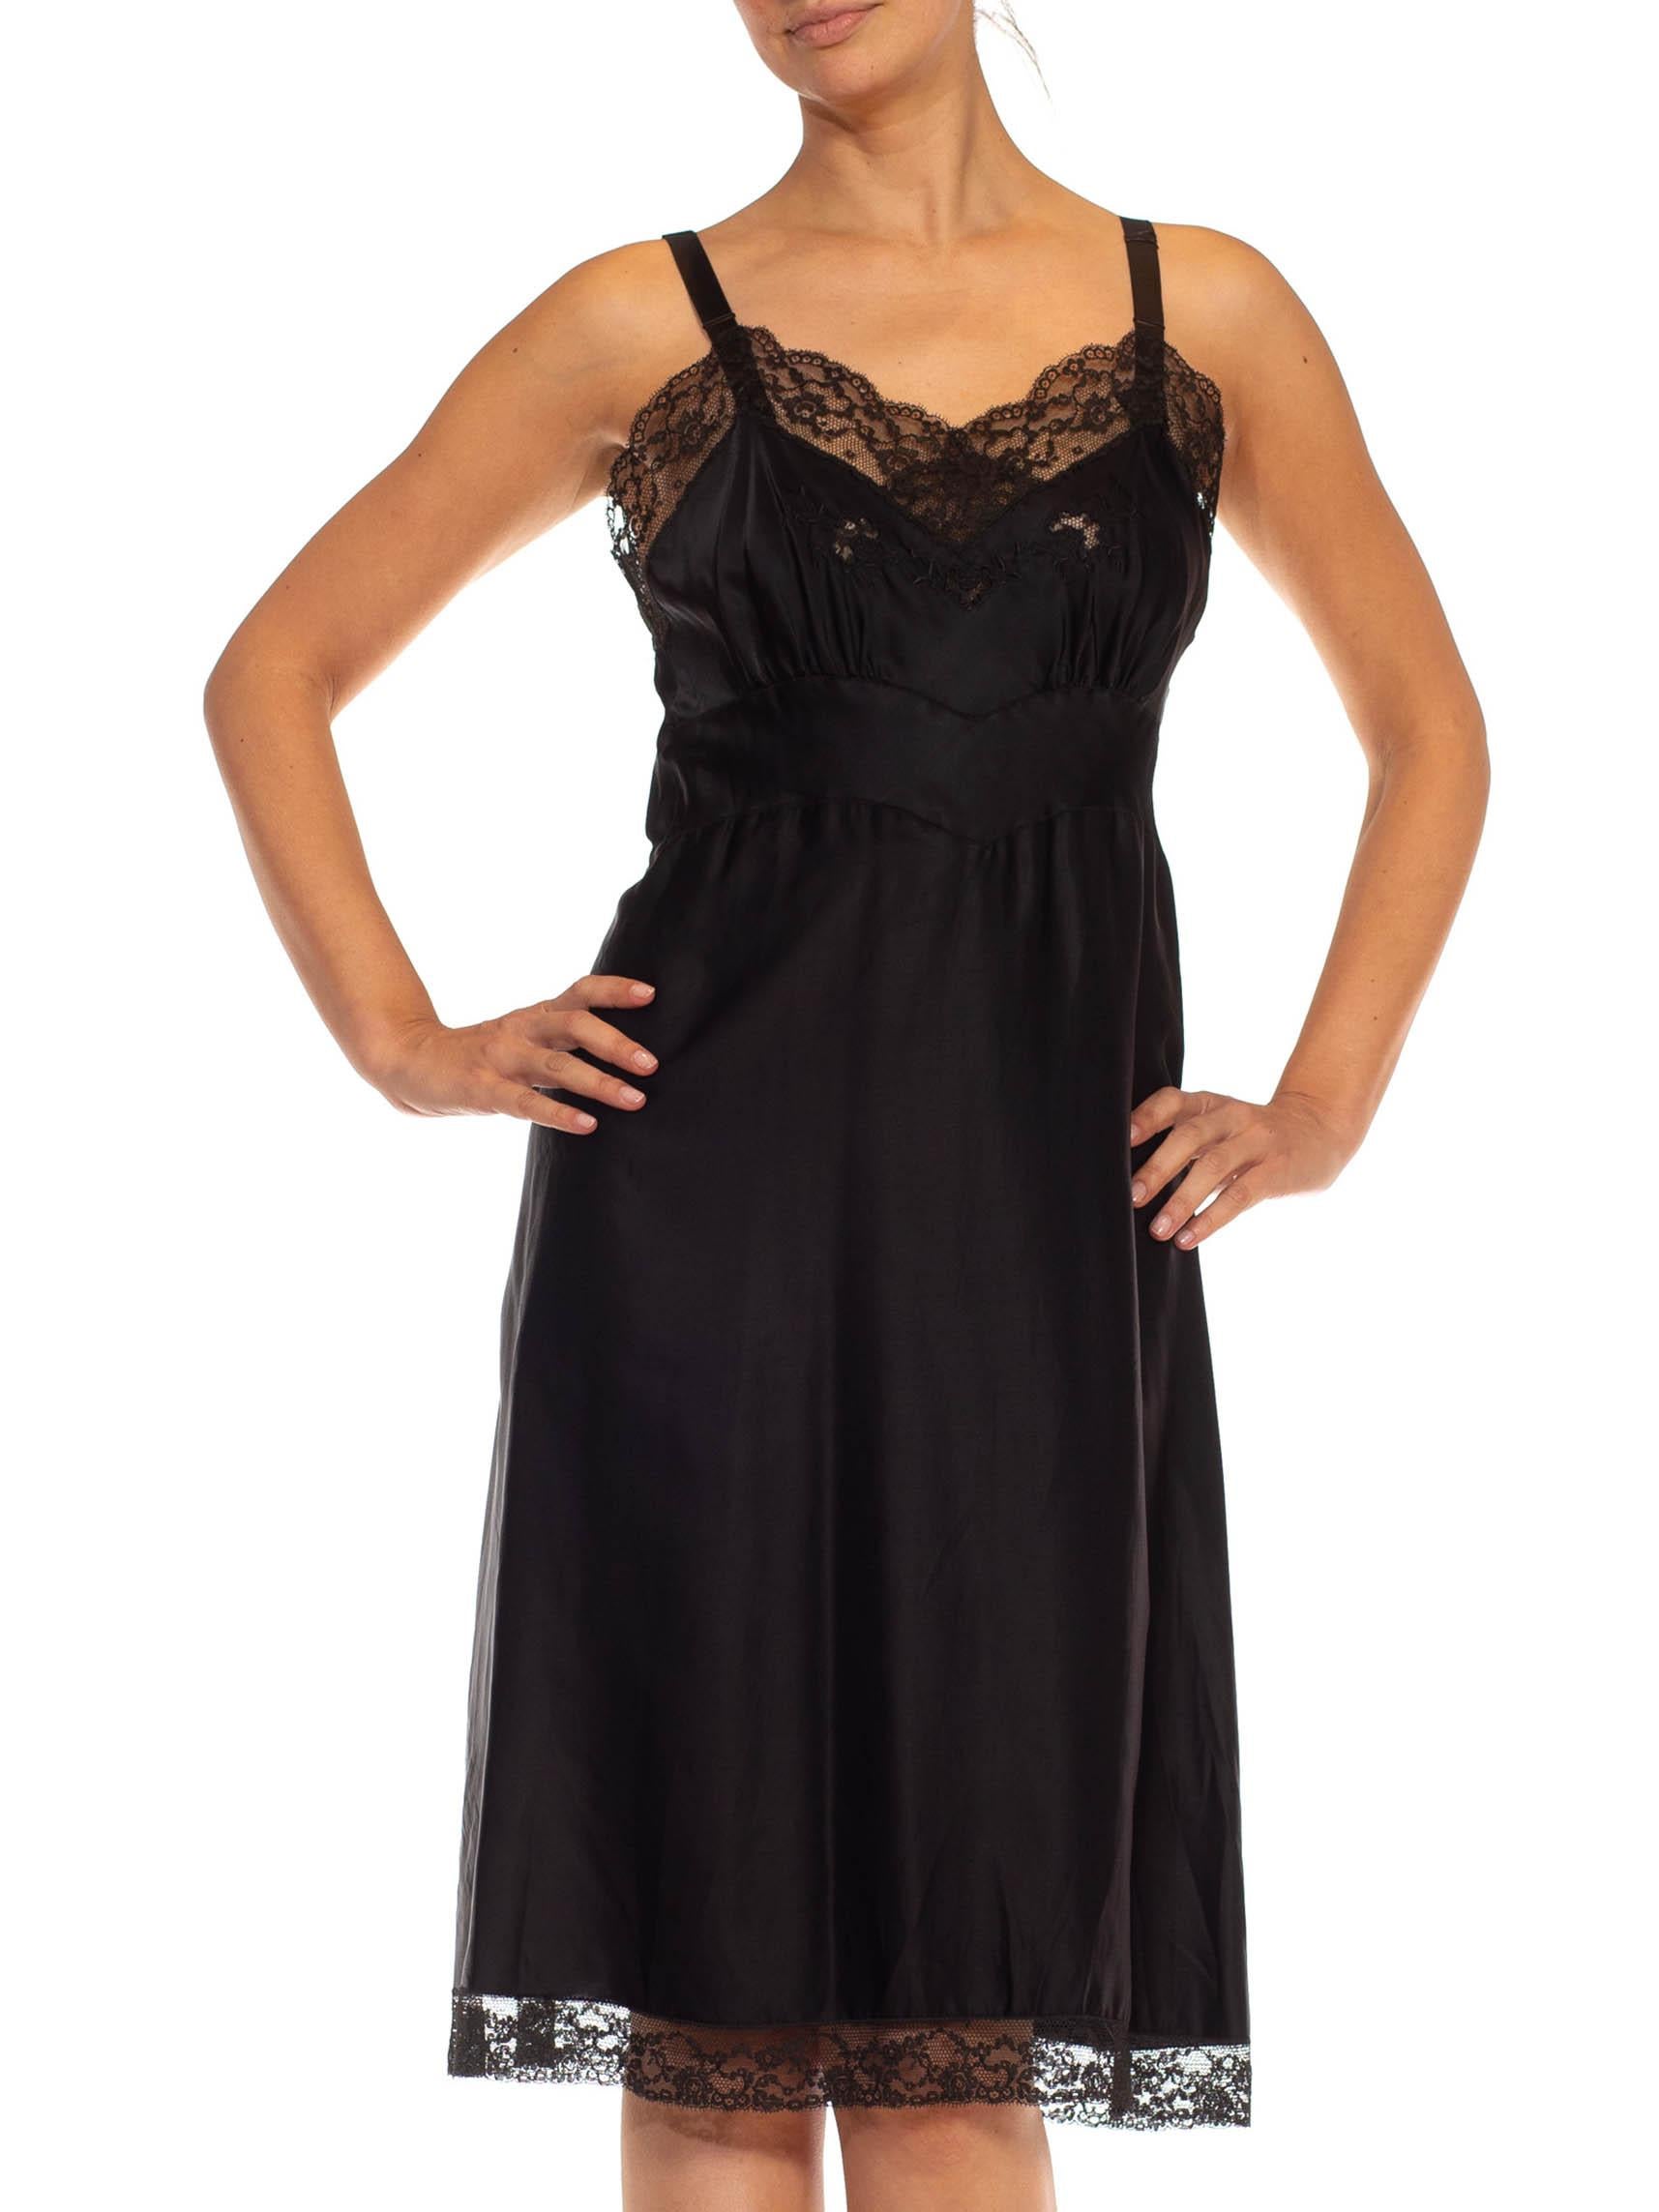 1950S Black Nylon Poly Satin & Lace Trim Slip Dress In Excellent Condition For Sale In New York, NY